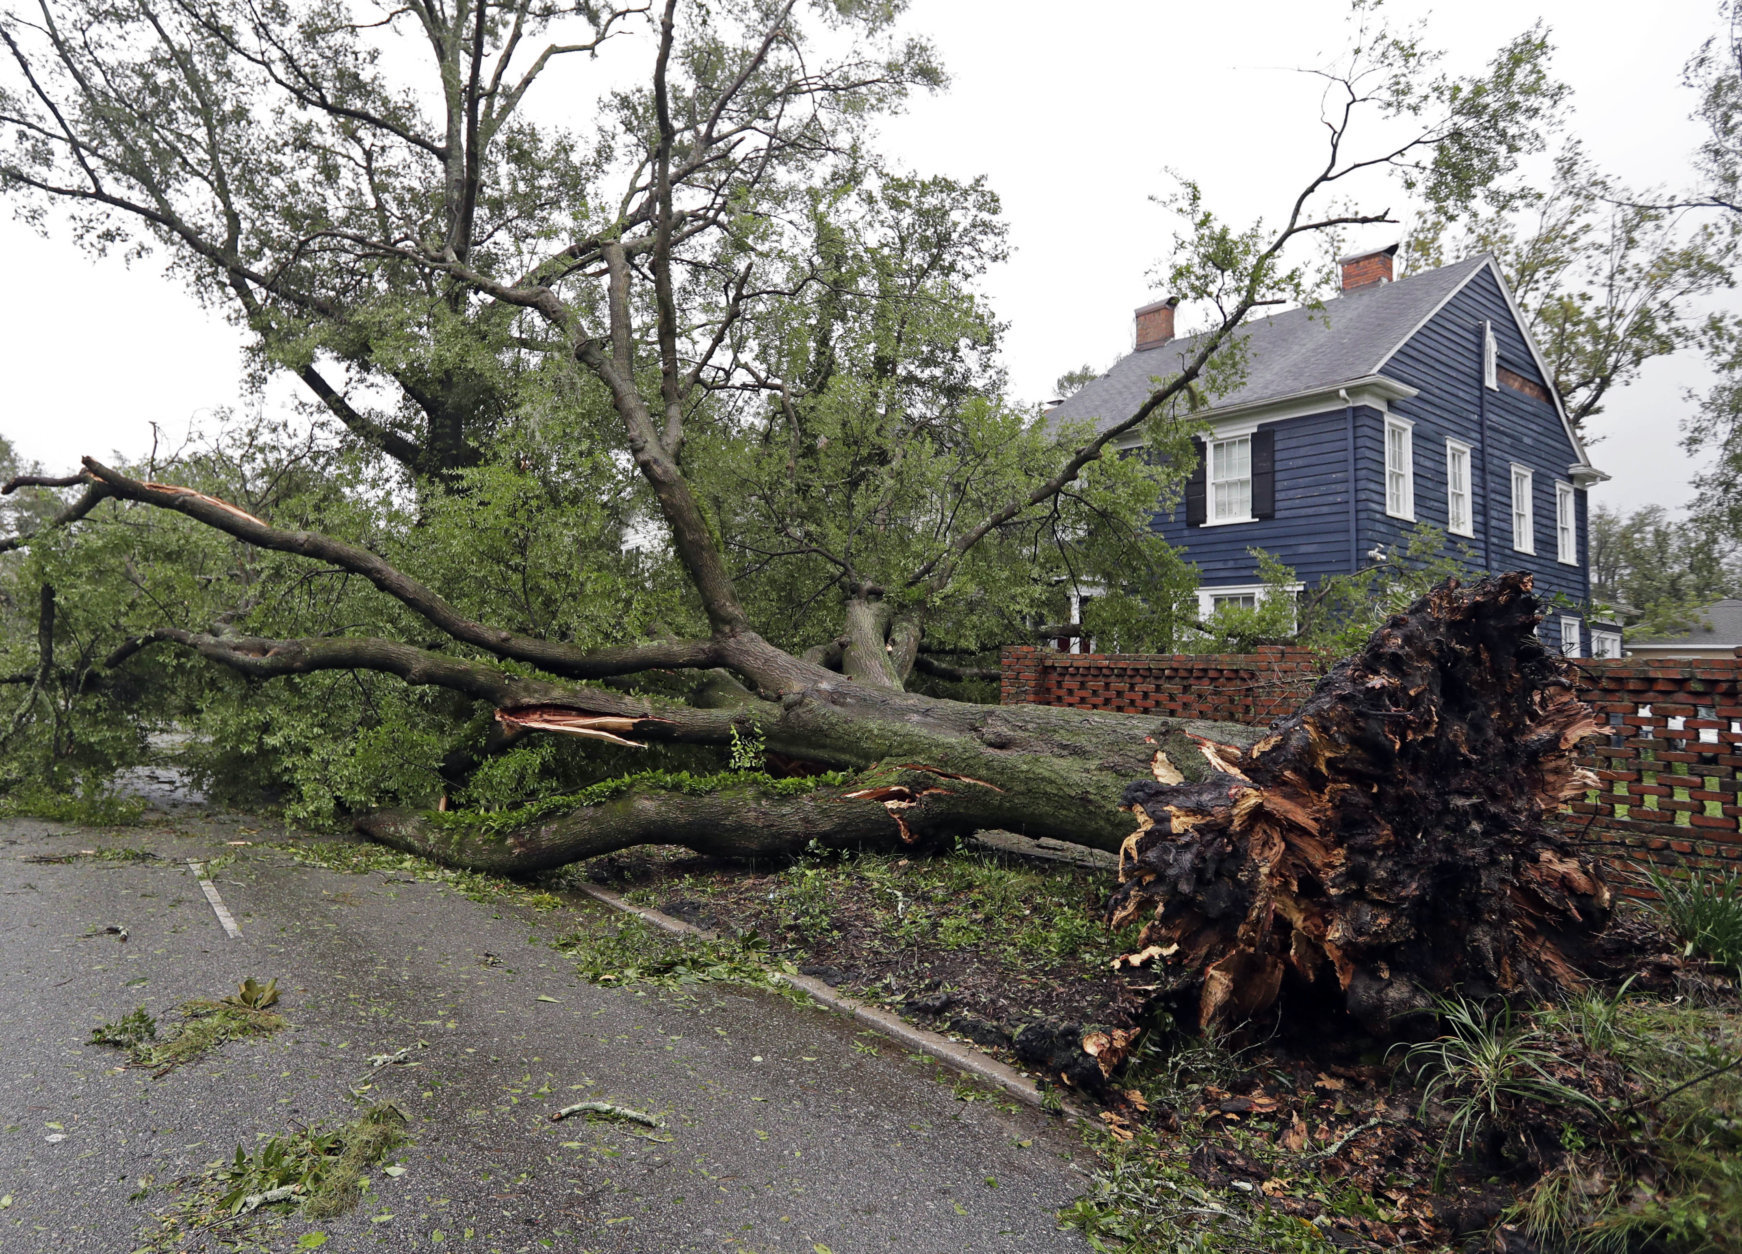 A tree uprooted by strong winds lies across a street in Wilmington, N.C., after Hurricane Florence made landfall Friday, Sept. 14, 2018. (AP Photo/Chuck Burton)